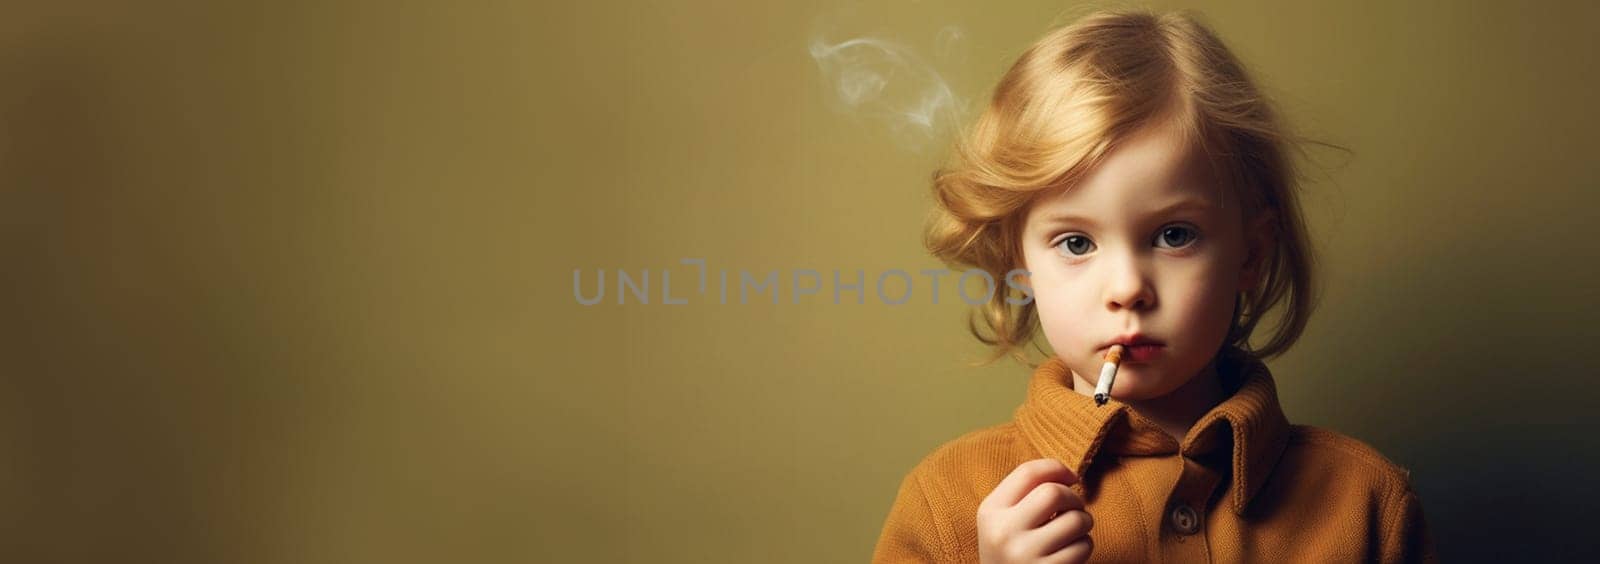 Concept for smoking in front of the child kid. A little child smoking a cigarette. Bad influence concept. Bad habit,health and safety and addiction background copy space by Annebel146